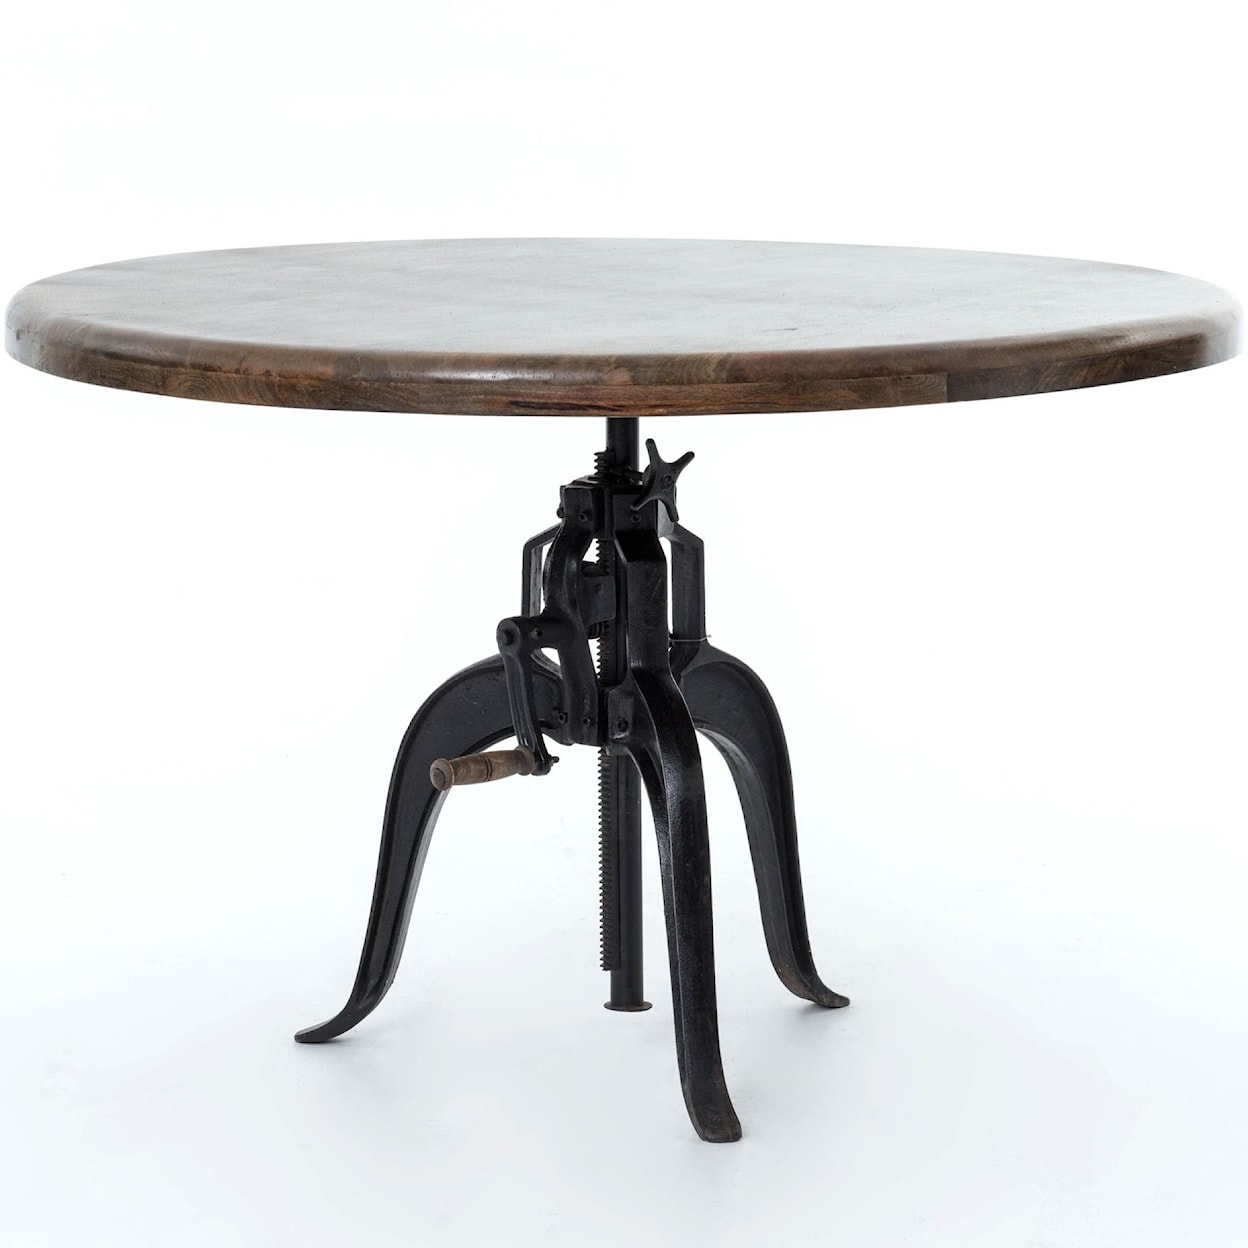 Four Hands Rockwell Adjustable Round Dining Table